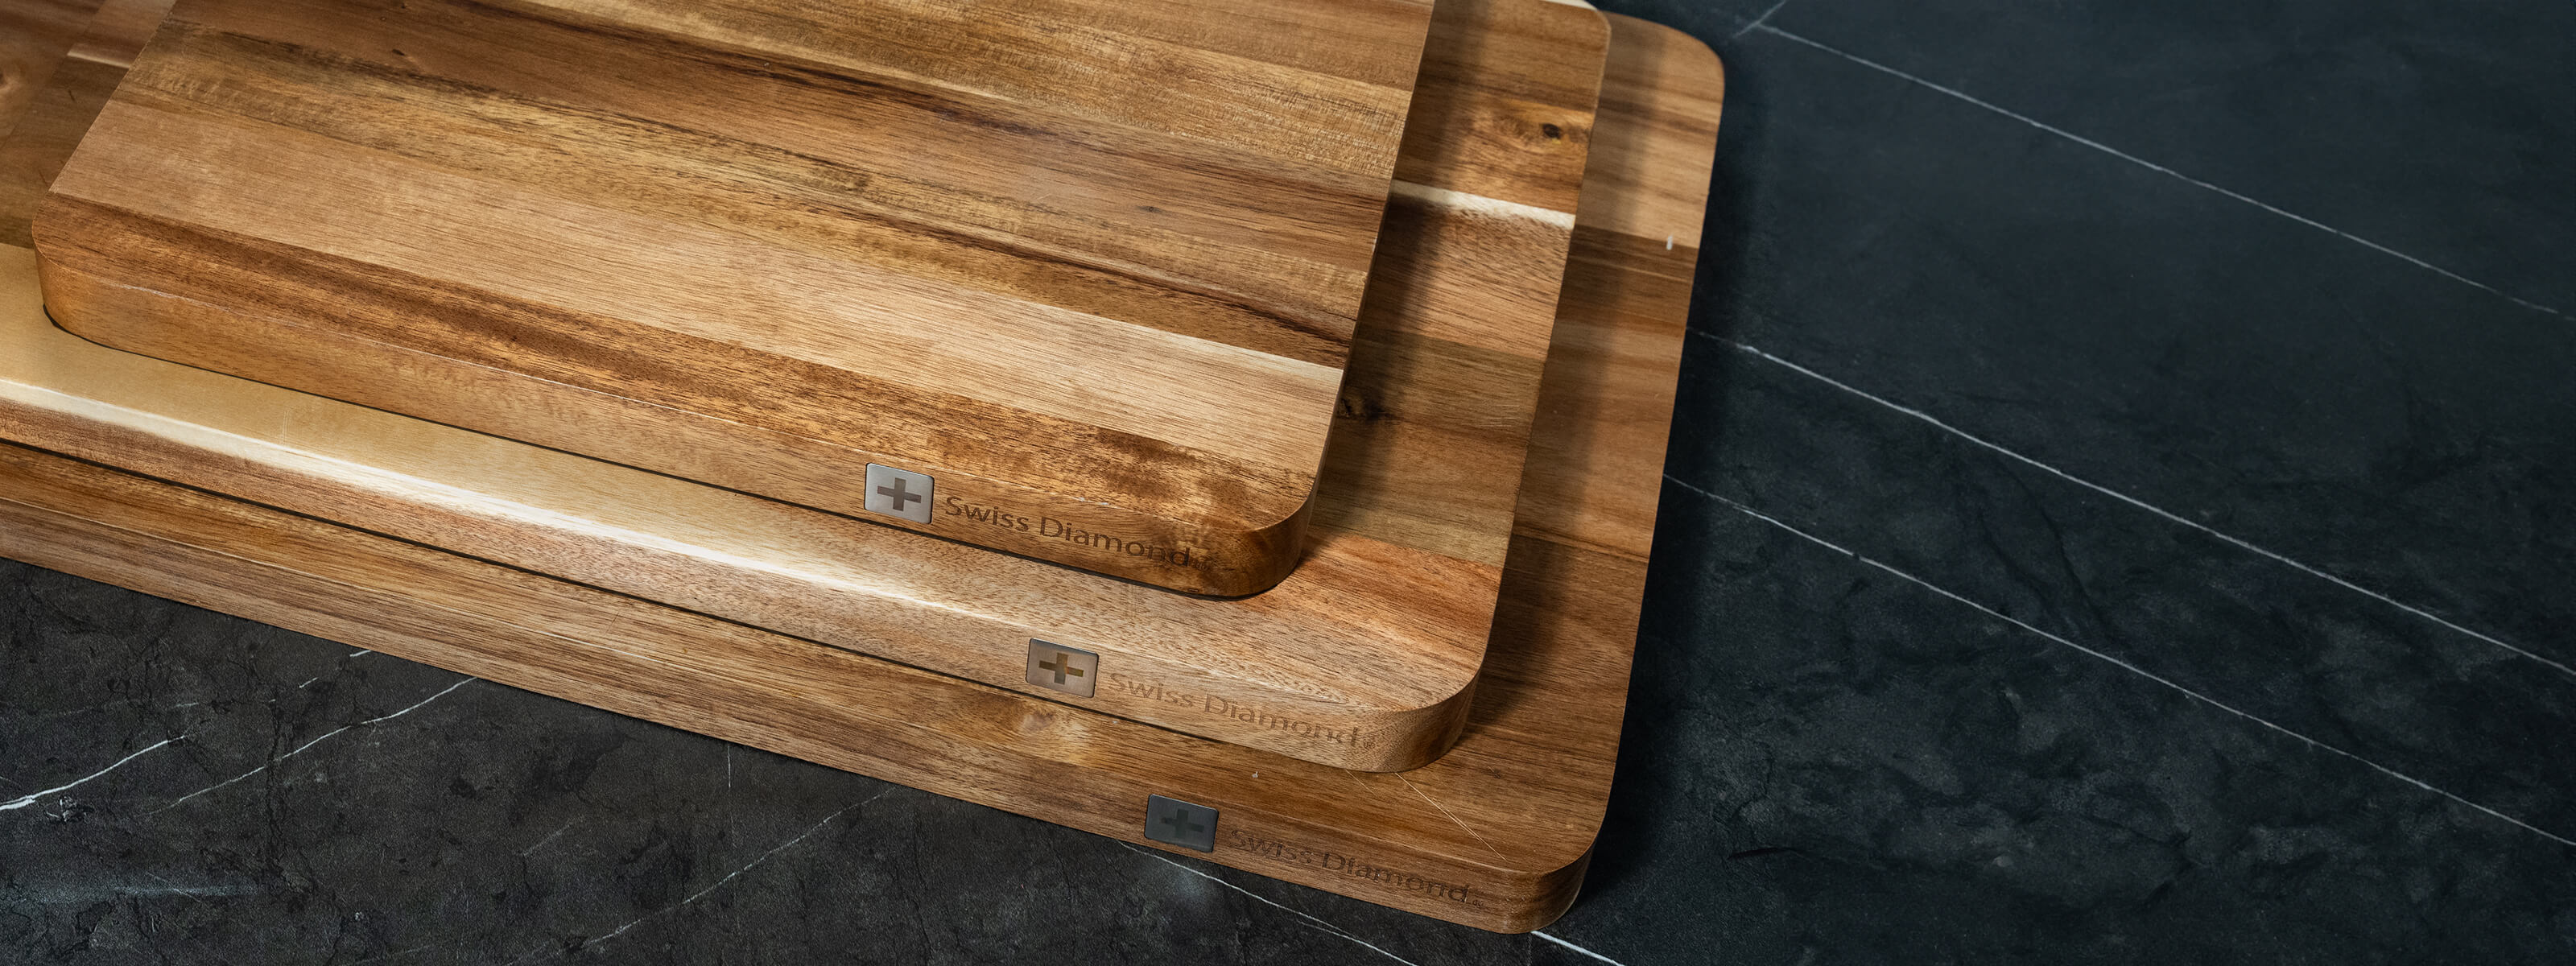 Acacia Wood Cutting Boards stacked on kitchen counter 